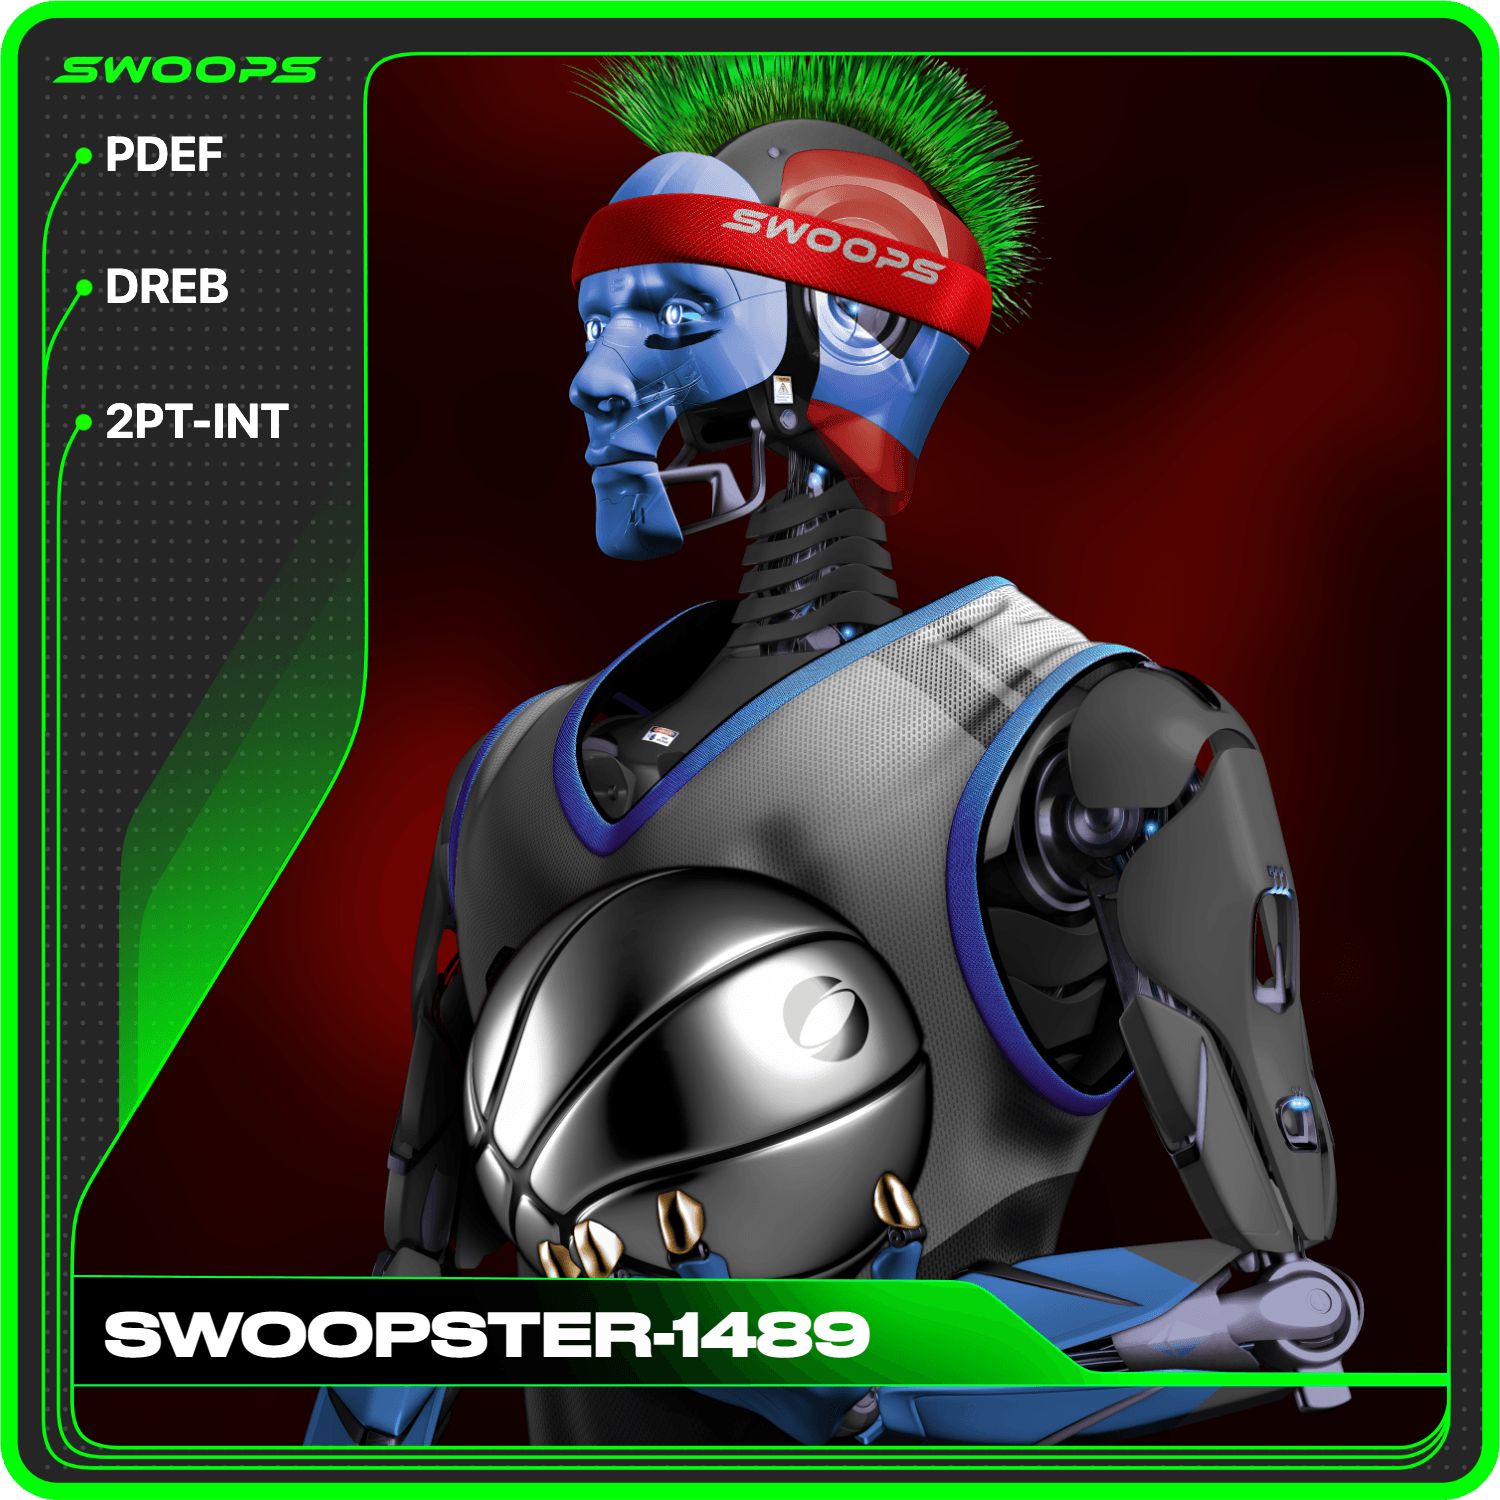 SWOOPSTER-1489